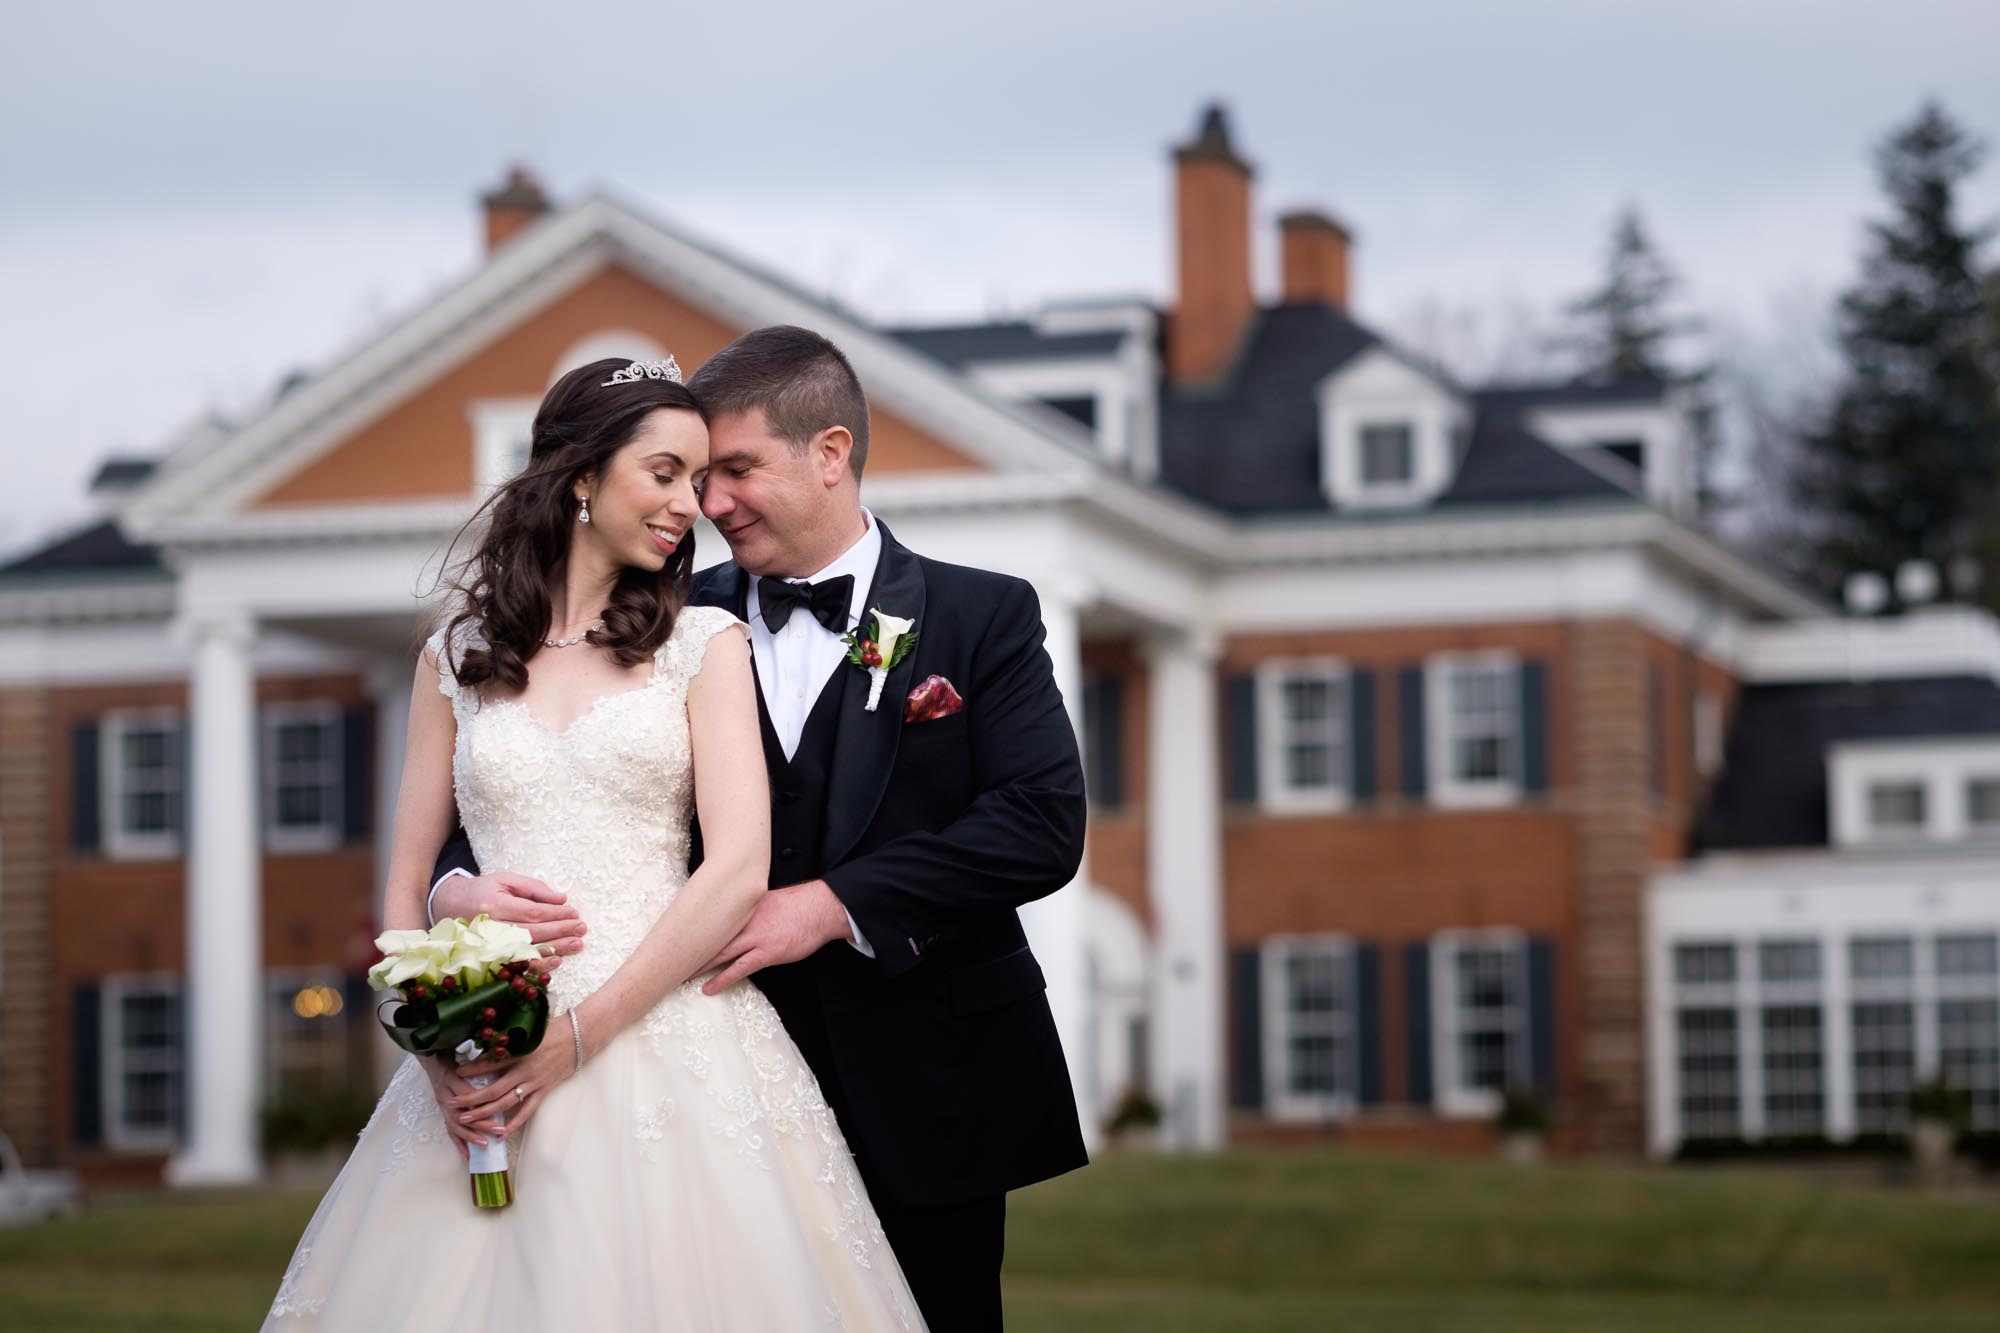  Rob and Amanda pose for a portrait during their wedding at Langdon Hall in Cambridge, Ontario. 